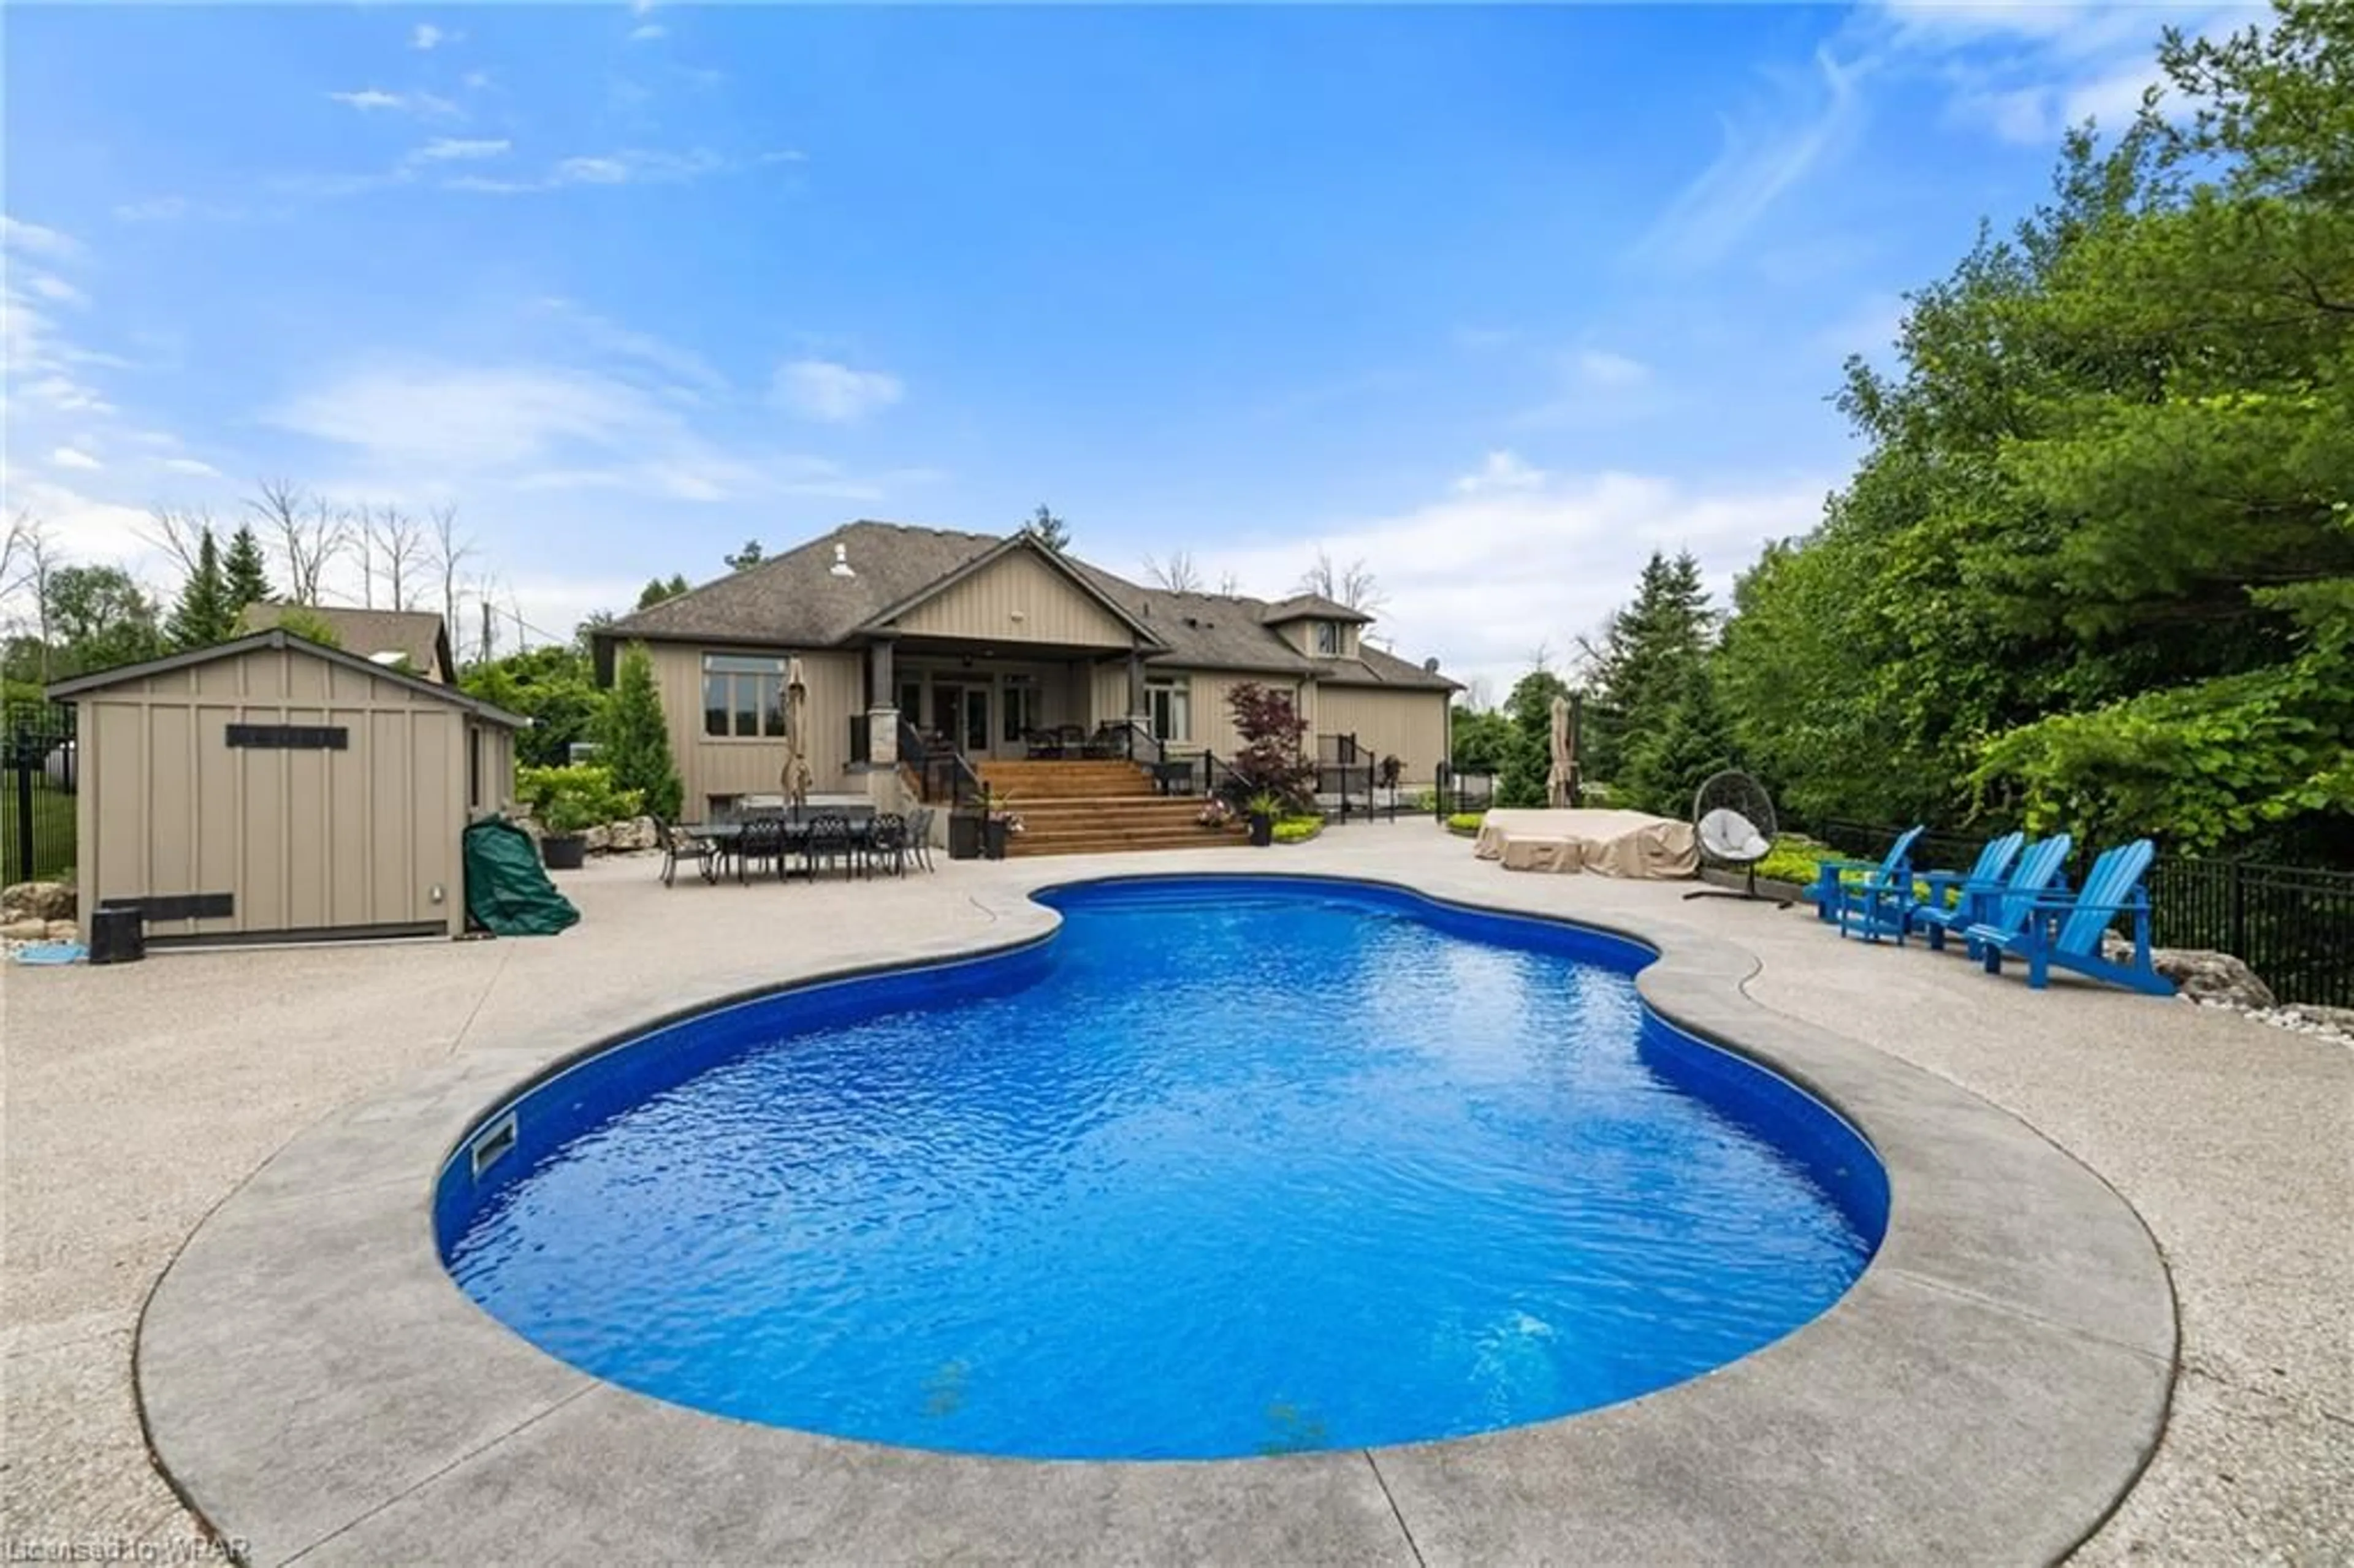 Indoor or outdoor pool for 2616 Morrison Rd, Cambridge Ontario N1R 5S2